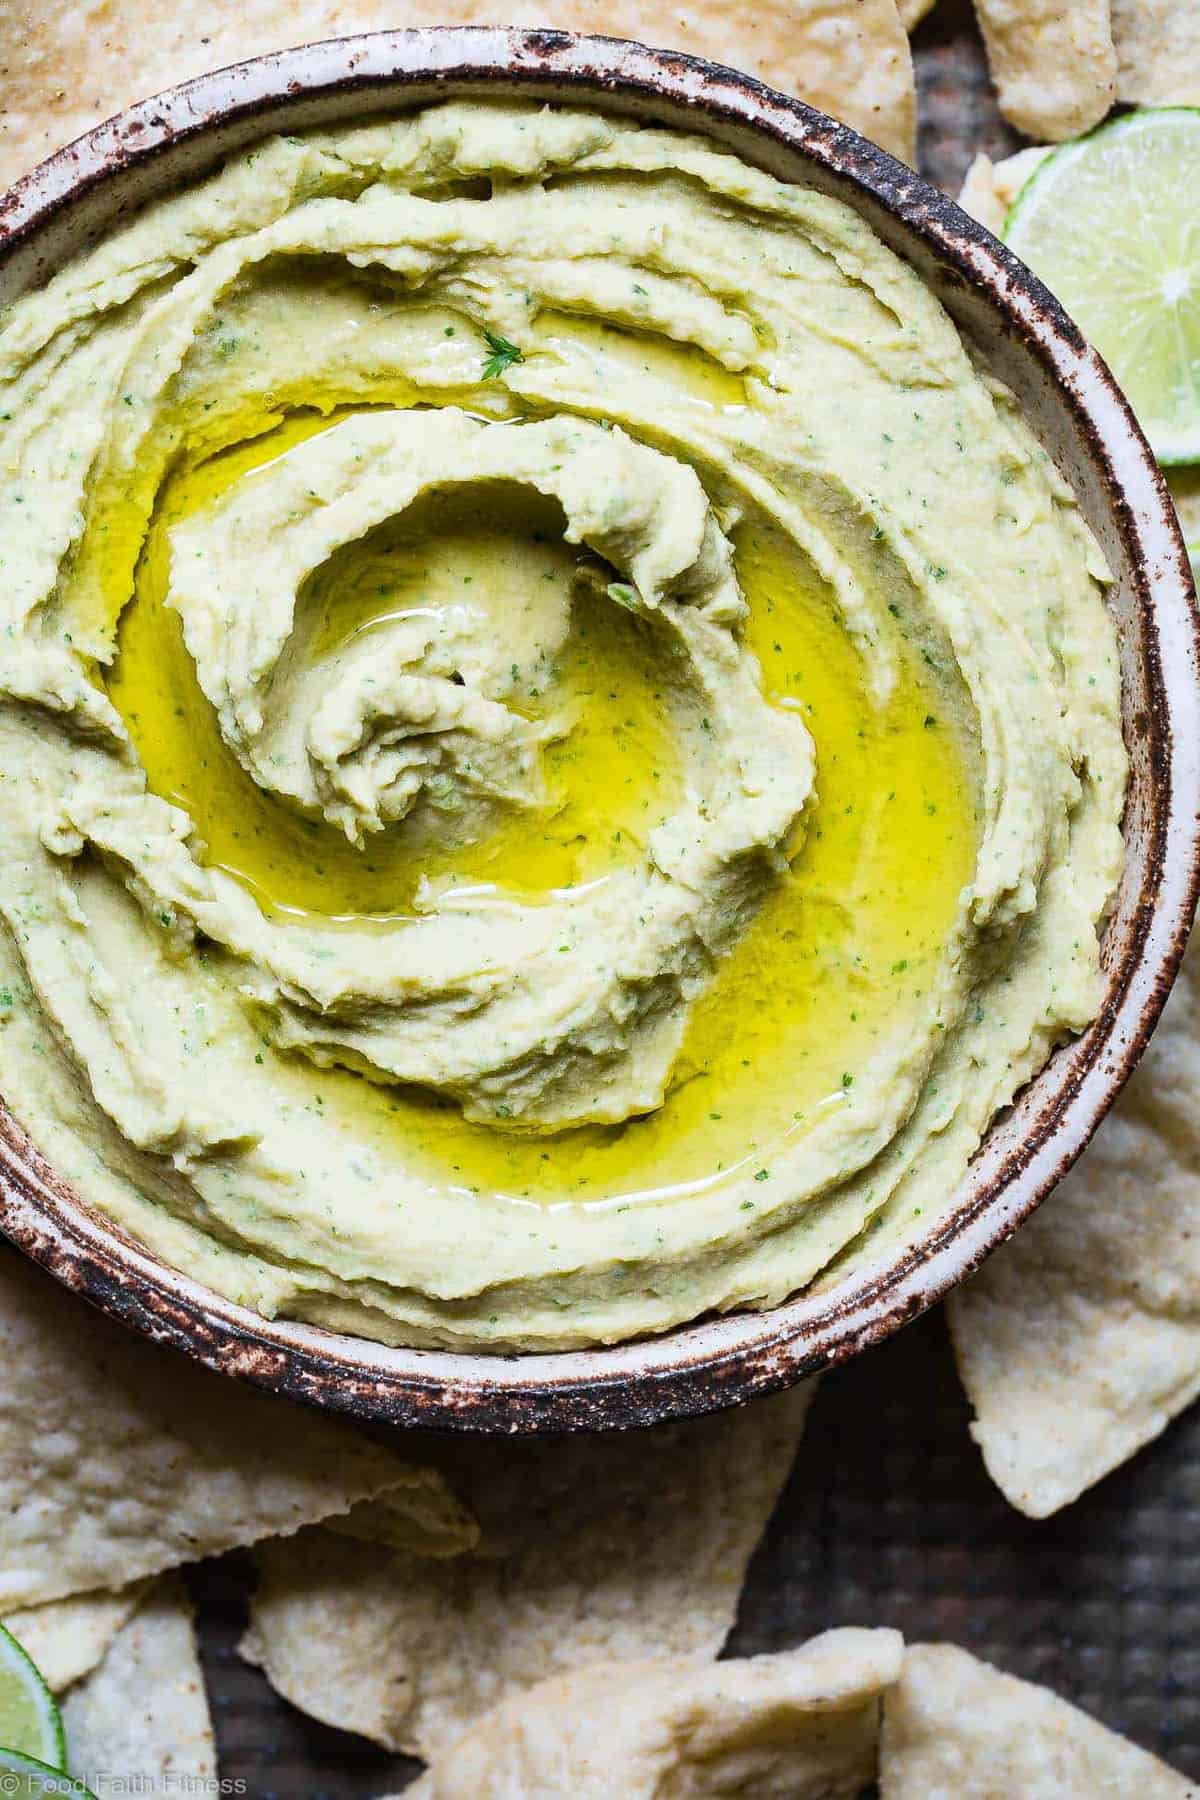 Cilantro Lime Jalapeno Hummus - This spicy, ADDICTING homemade hummus doesn't use tahini! Perfect for snacks, or spreading on a sandwich and gluten free, vegan and 0 Weight Watchers Freestlye Points! | #Foodfaithfitness | #Vegan #Glutenfree #Healthy #Dairyfree #Hummus